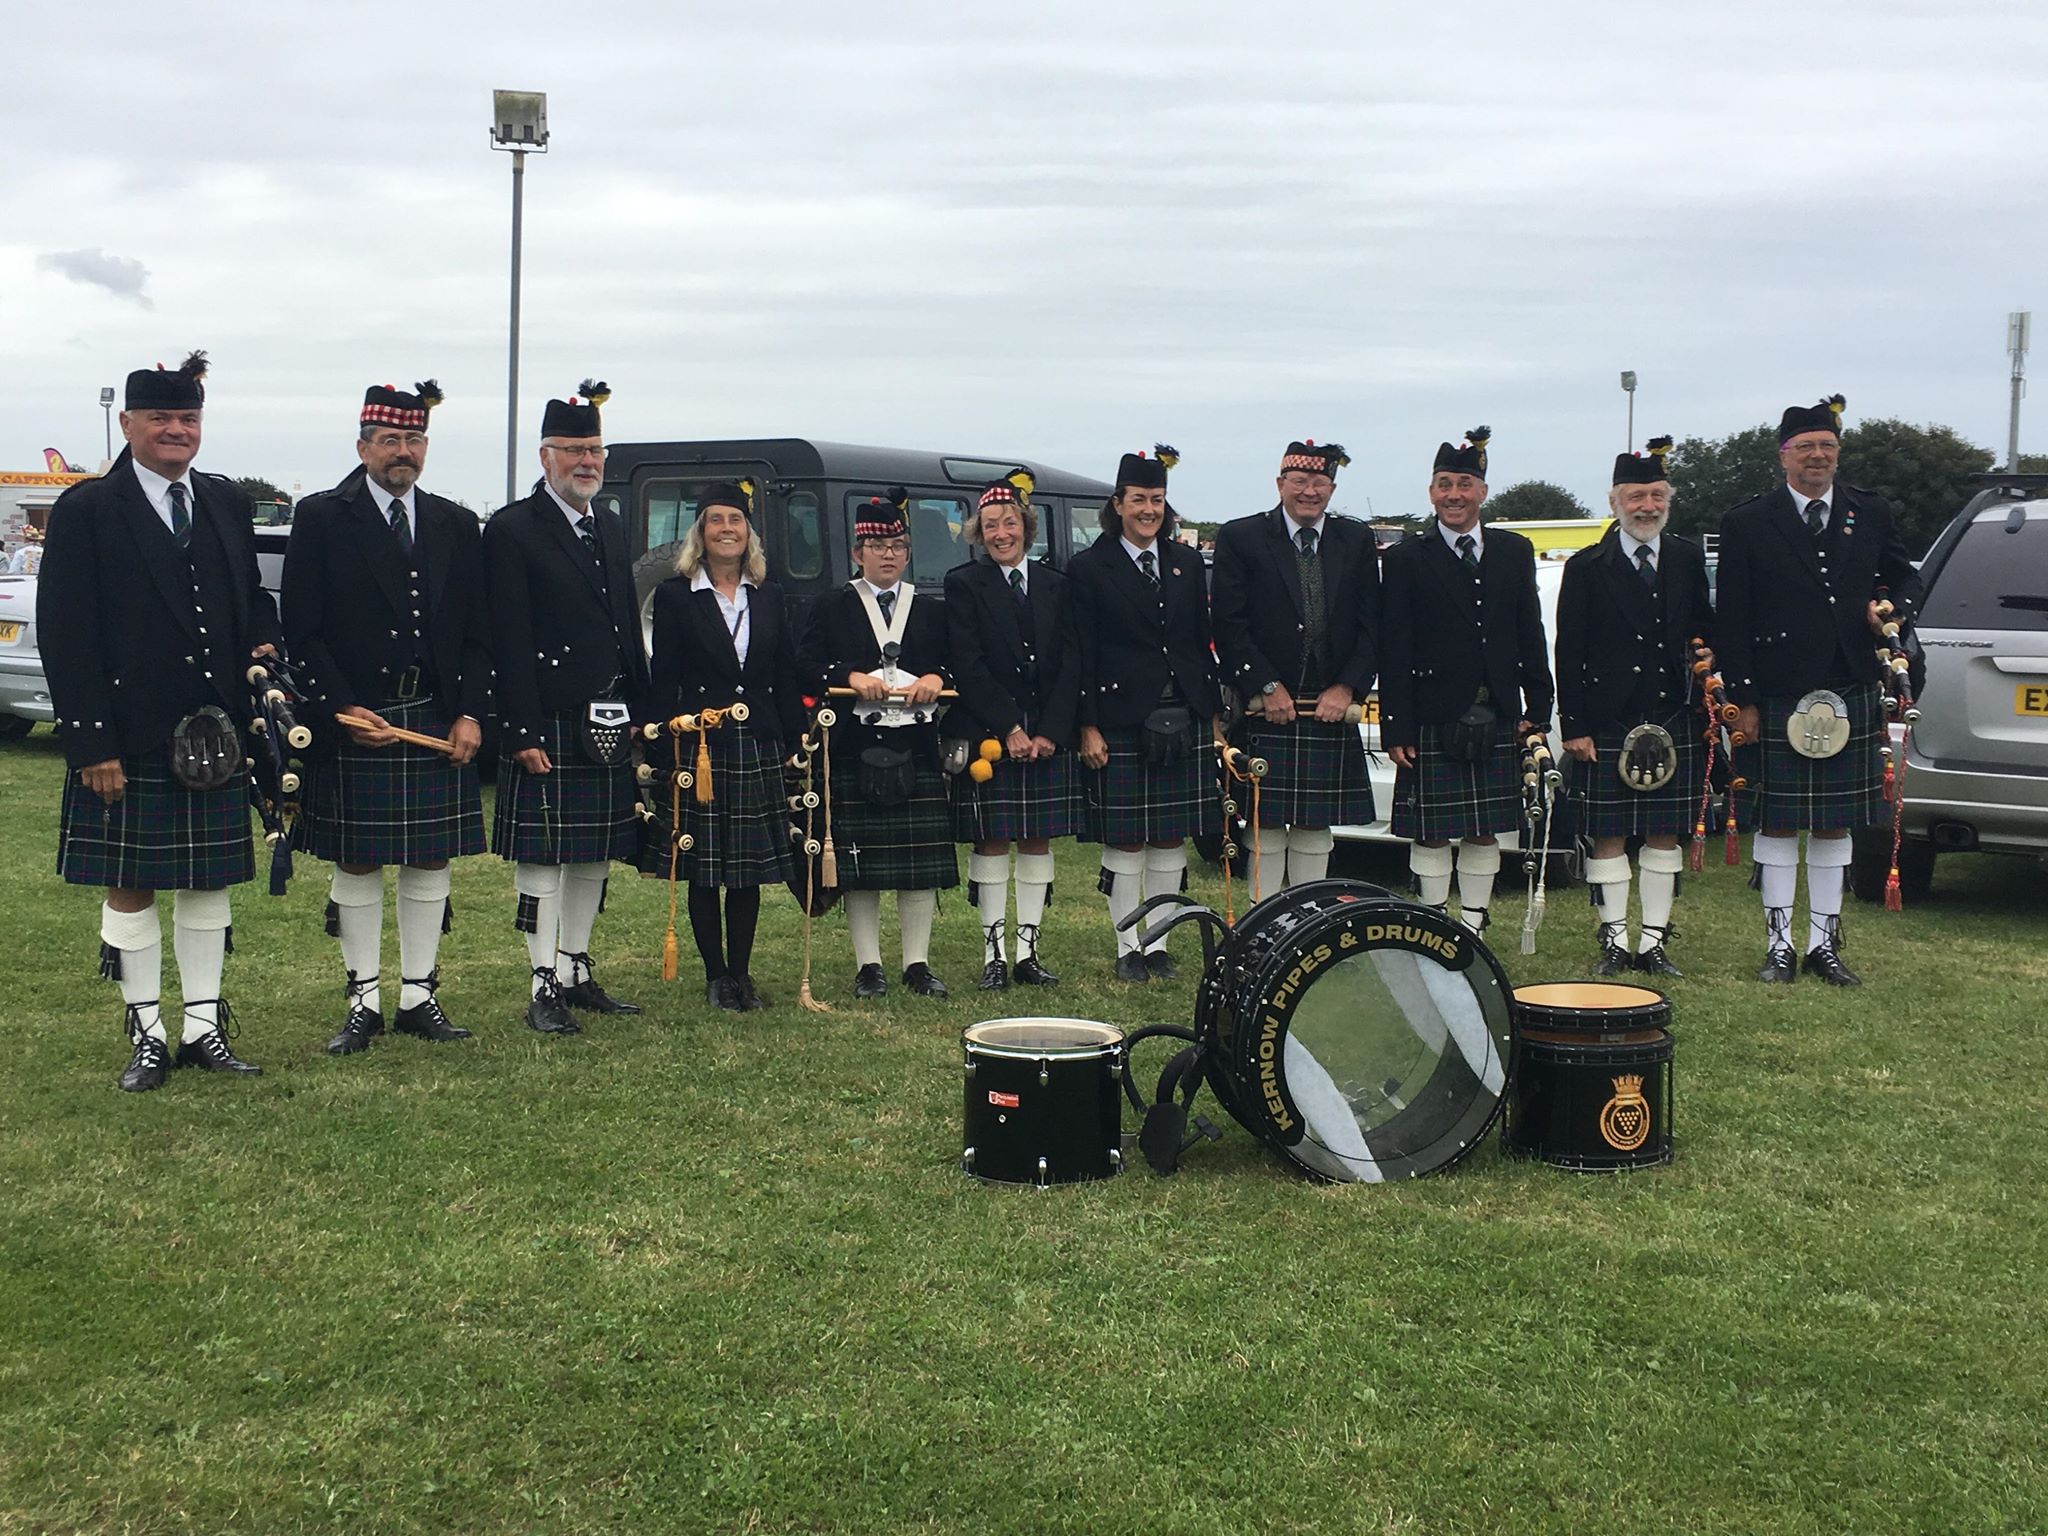 Kernow Pipes and Drums at St Merryn carnival 2019